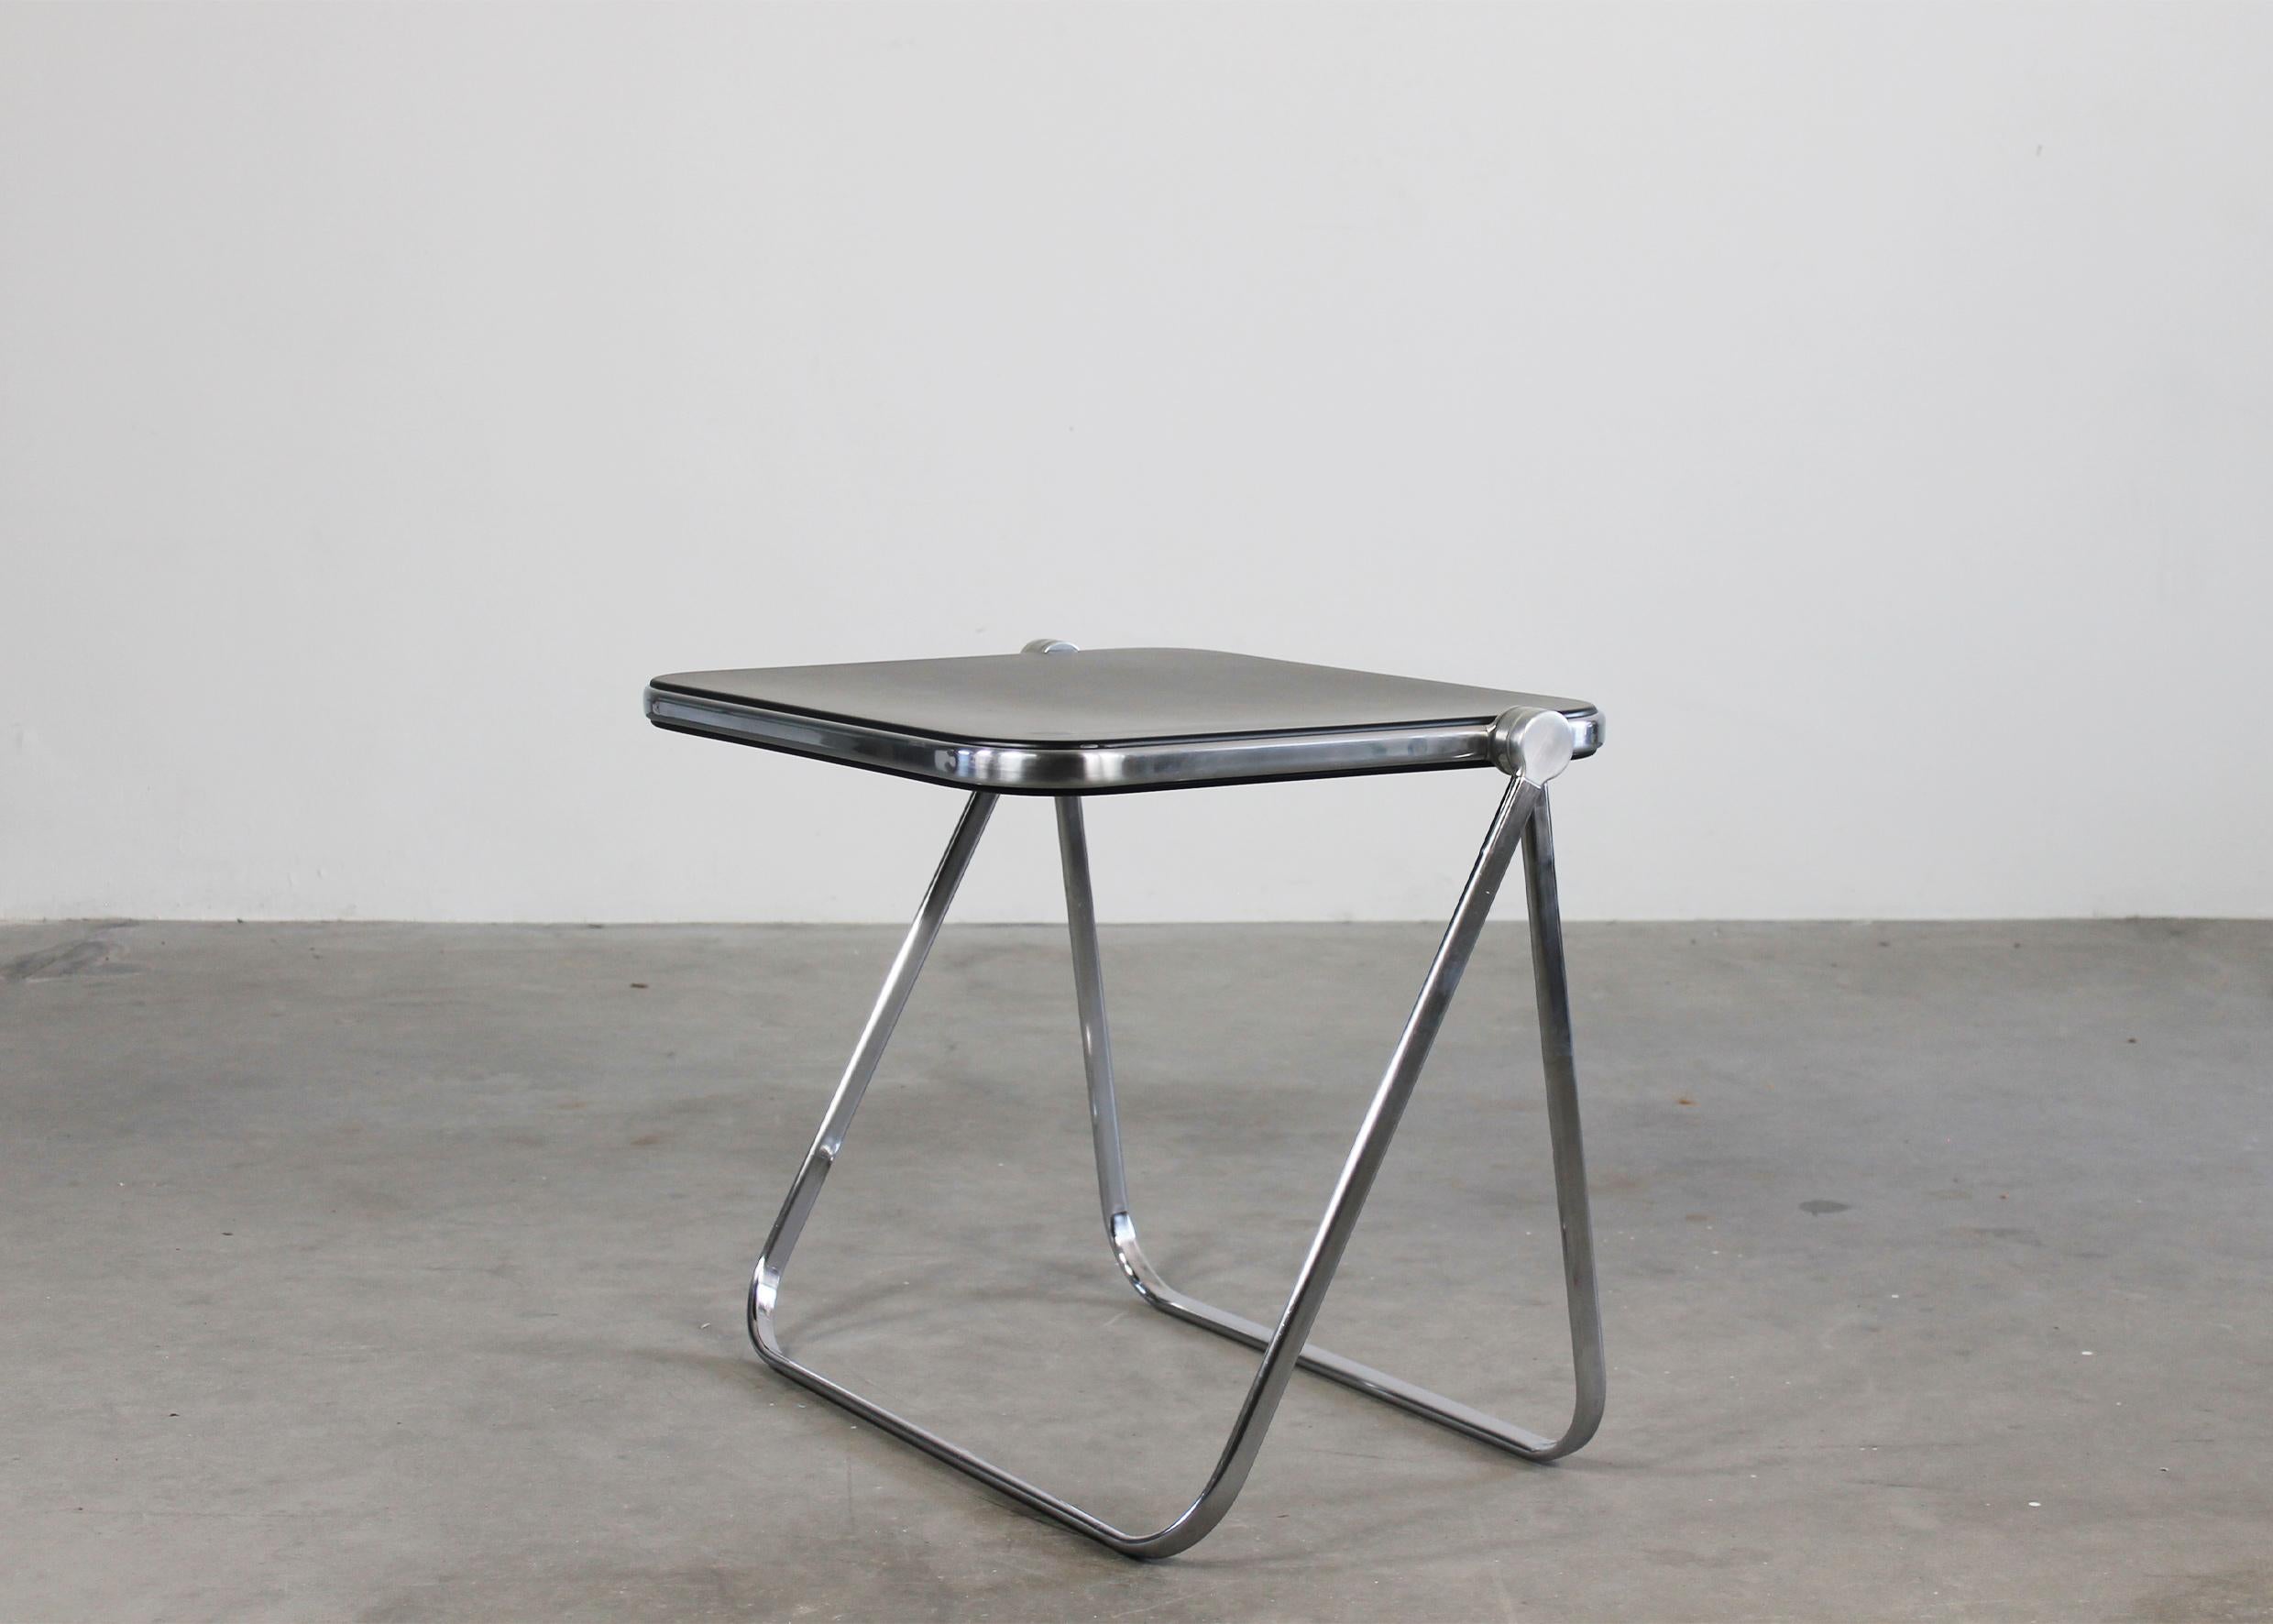 Platone folding table or desk with structure in chromed steel and die-cast aluminum, table top in black ABS.
Designed by Giancarlo Piretti and produced by Anonima Castelli in 1970s, Italy. 
Platone table is part of the permanent design collection of